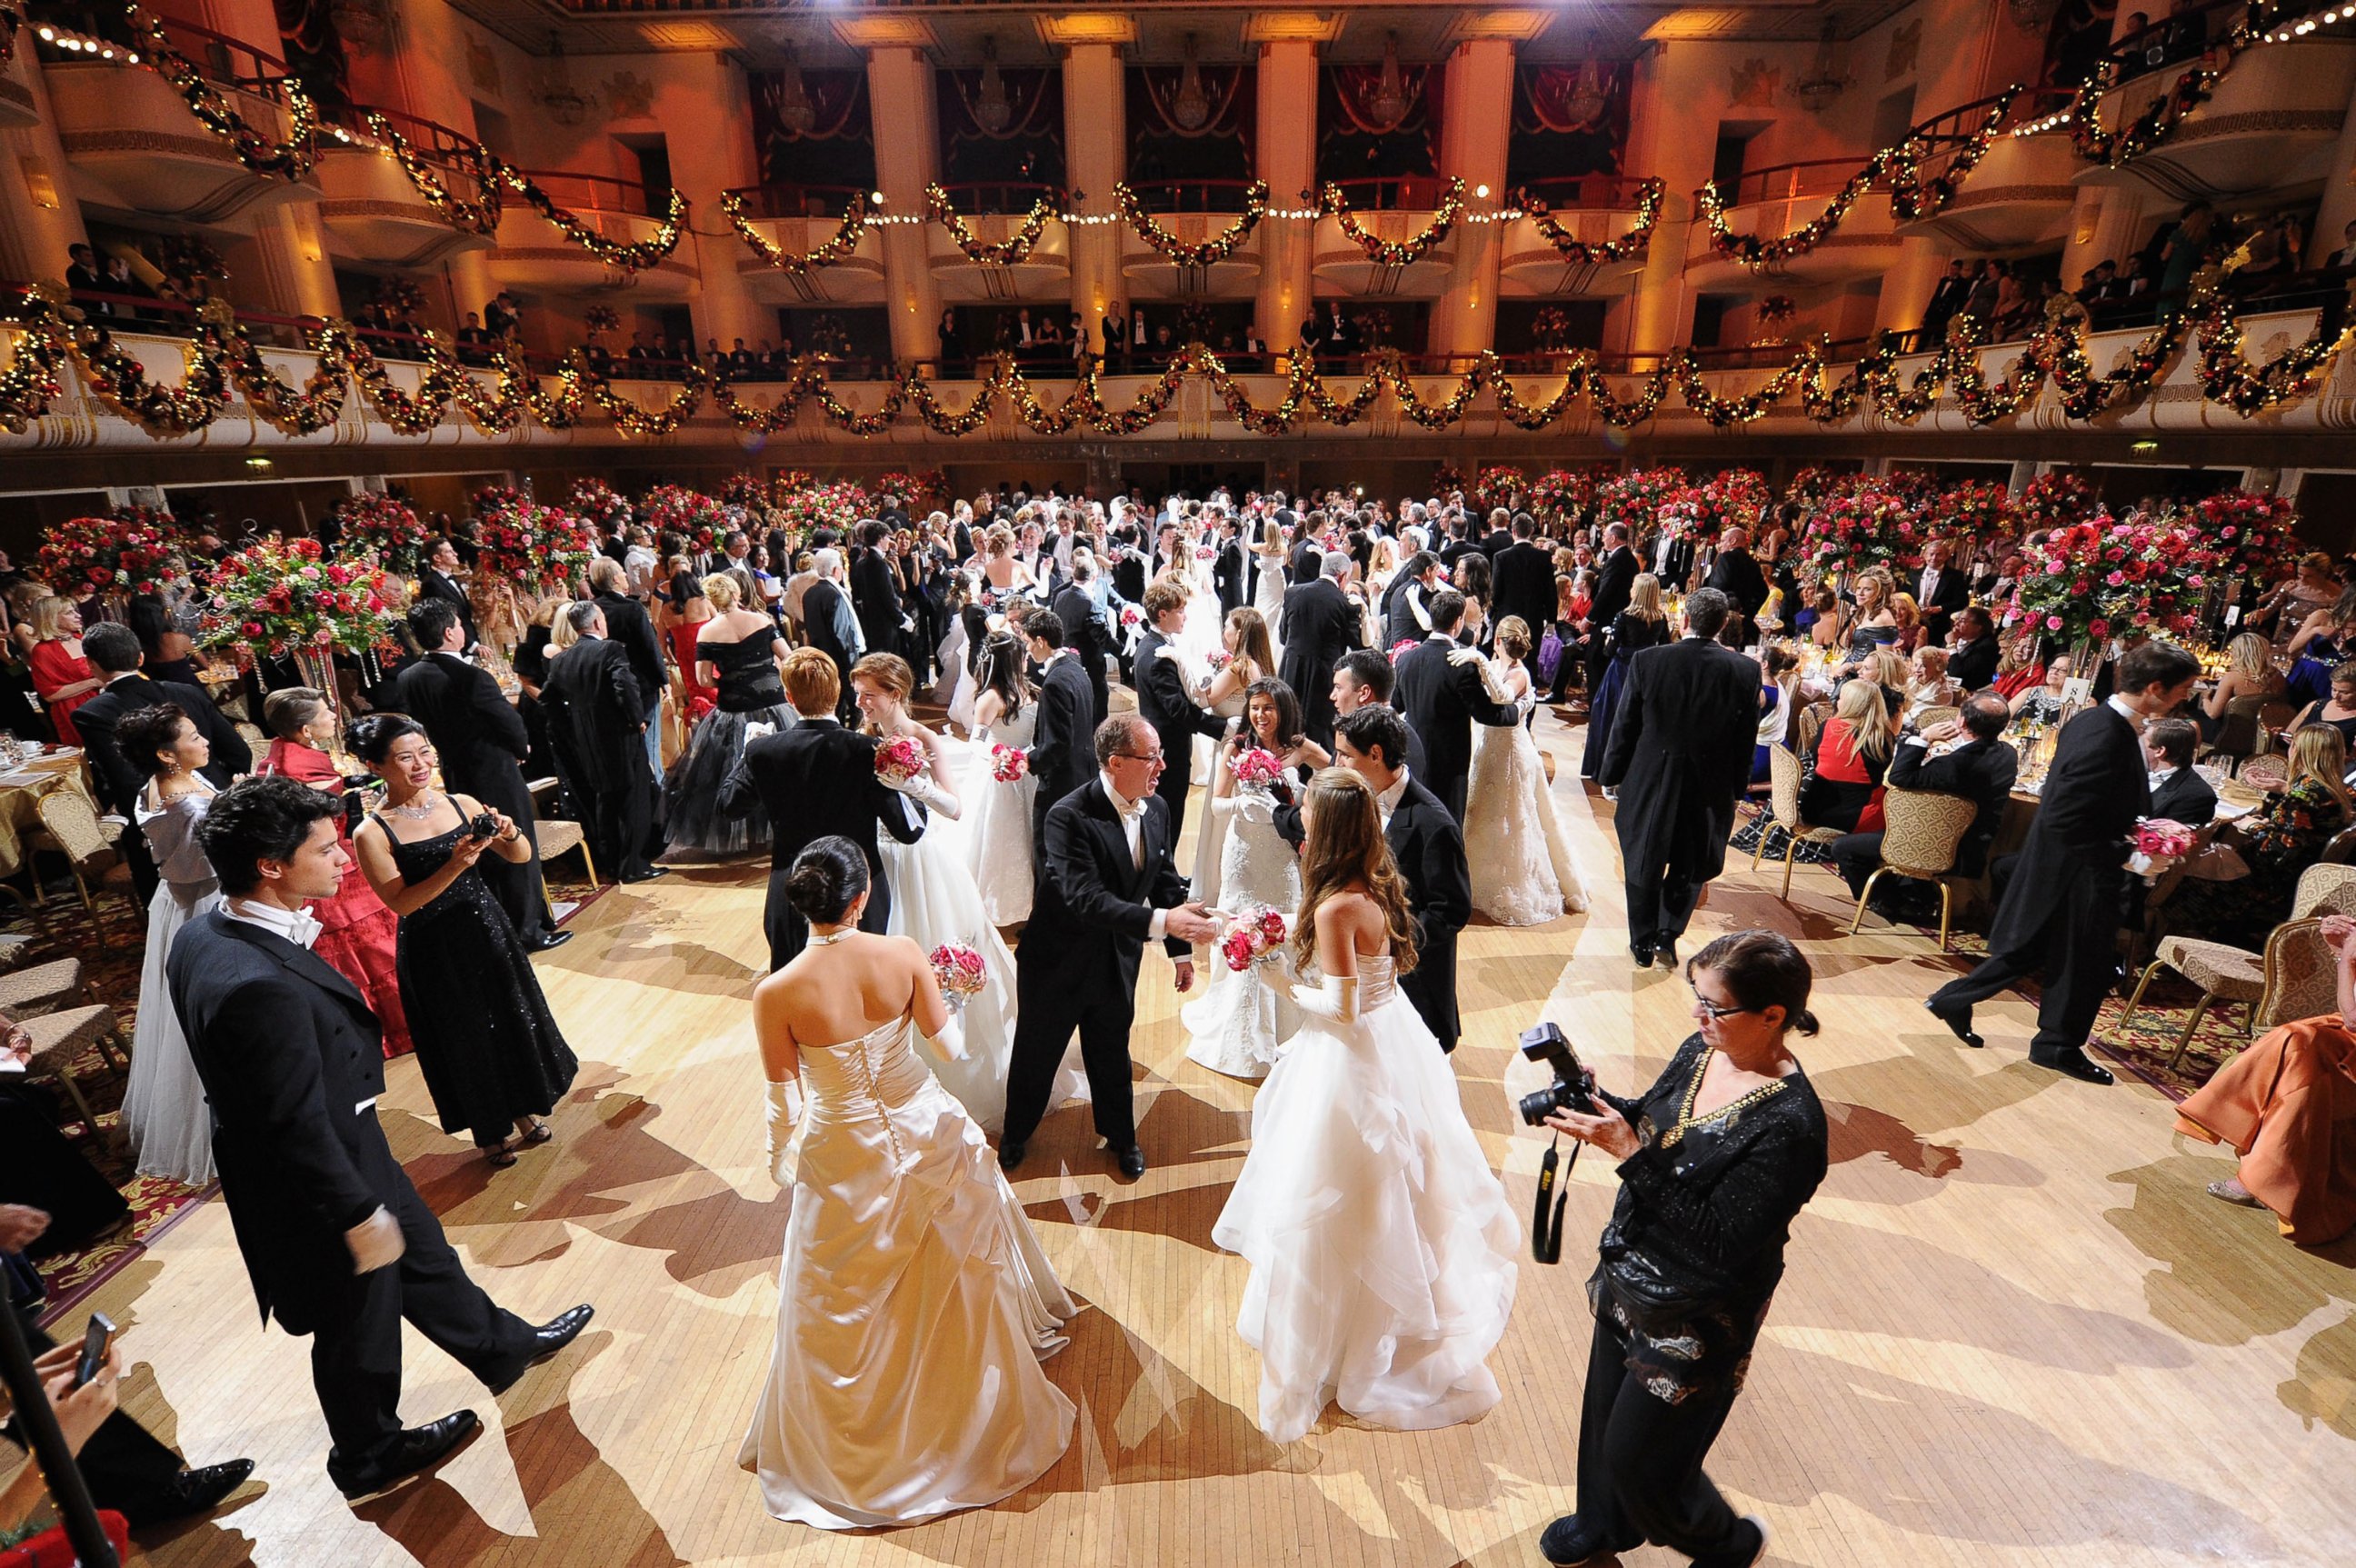 PHOTO: A general view of atmosphere during the 60th International Debutante Ball at The Waldorf Astoria on Dec. 29, 2014 in New York City.